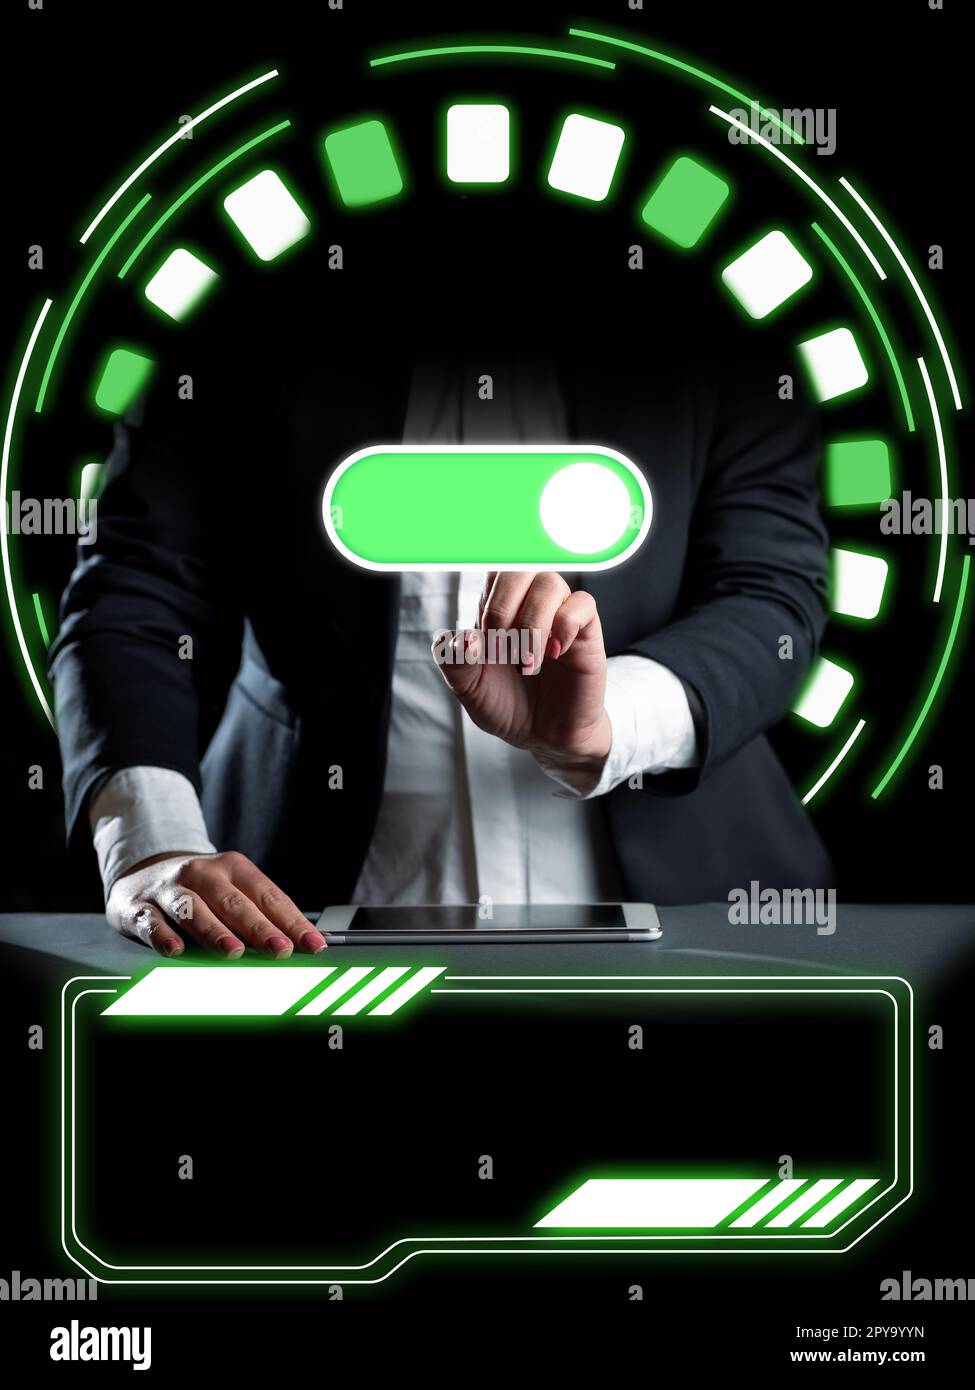 Lady sitting at the table and pressing virtual button with his finger. Mobile phone laying on desk and glowing. Important information inside frame in futuristic style. Stock Photo